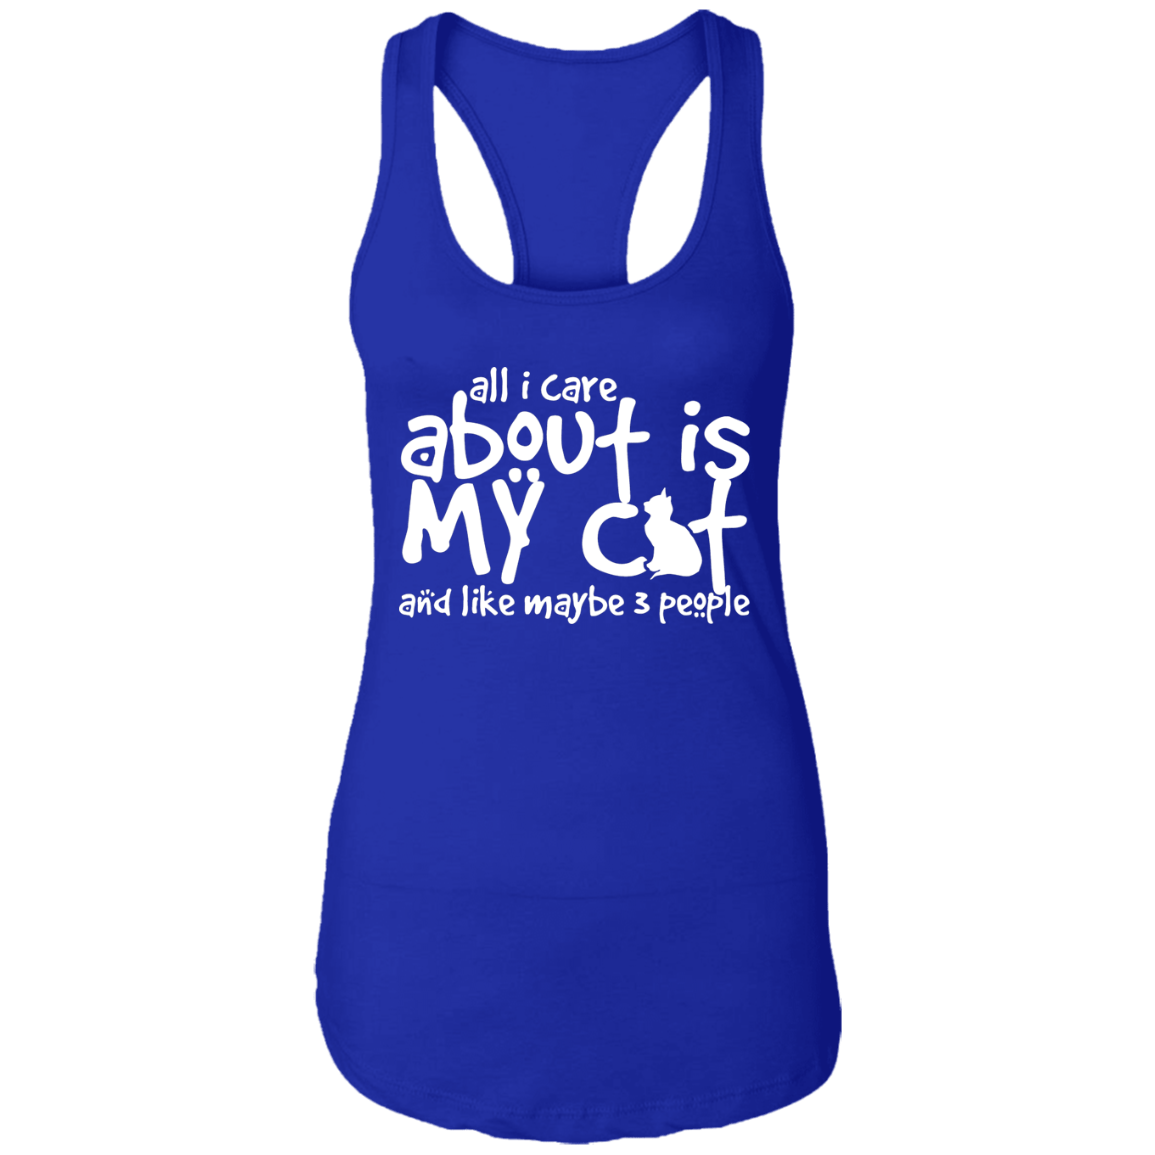 All I Care About Is My Cat - Ladies Racer Back Tank.